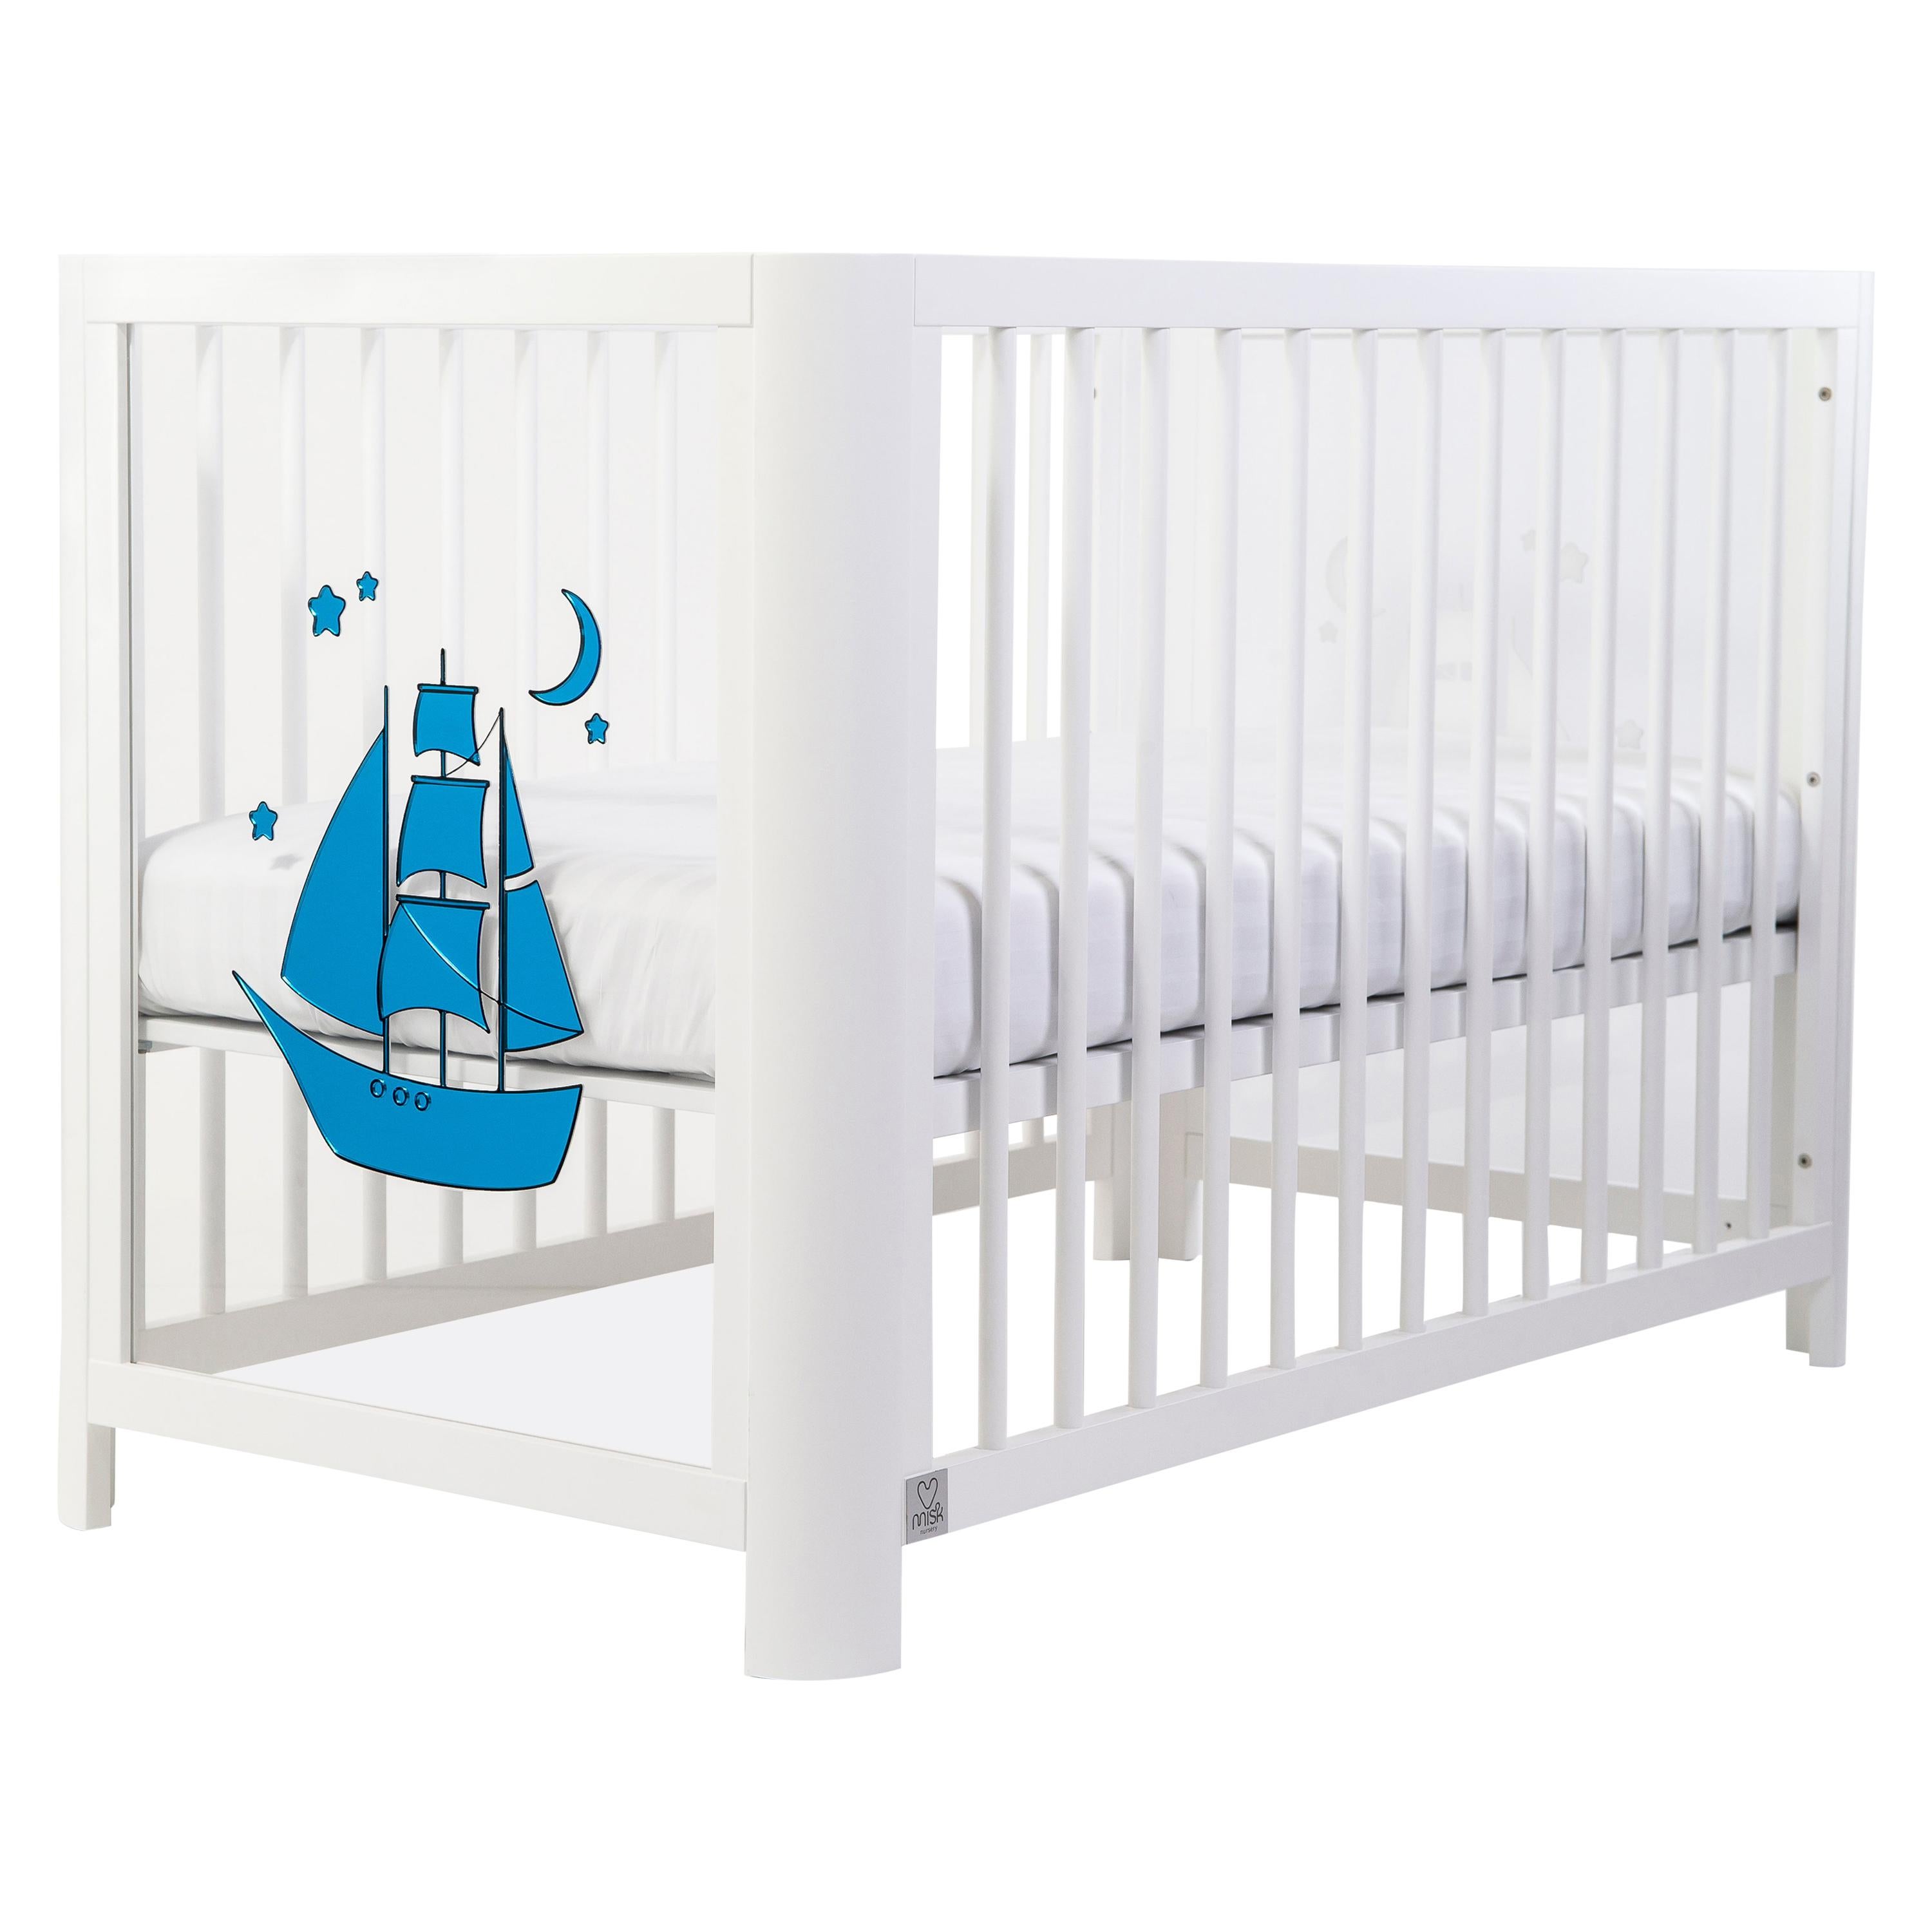 Handmade Sense of Sea 5-in-1 Crib in Wood and Acrylic by MISK Nursery For Sale